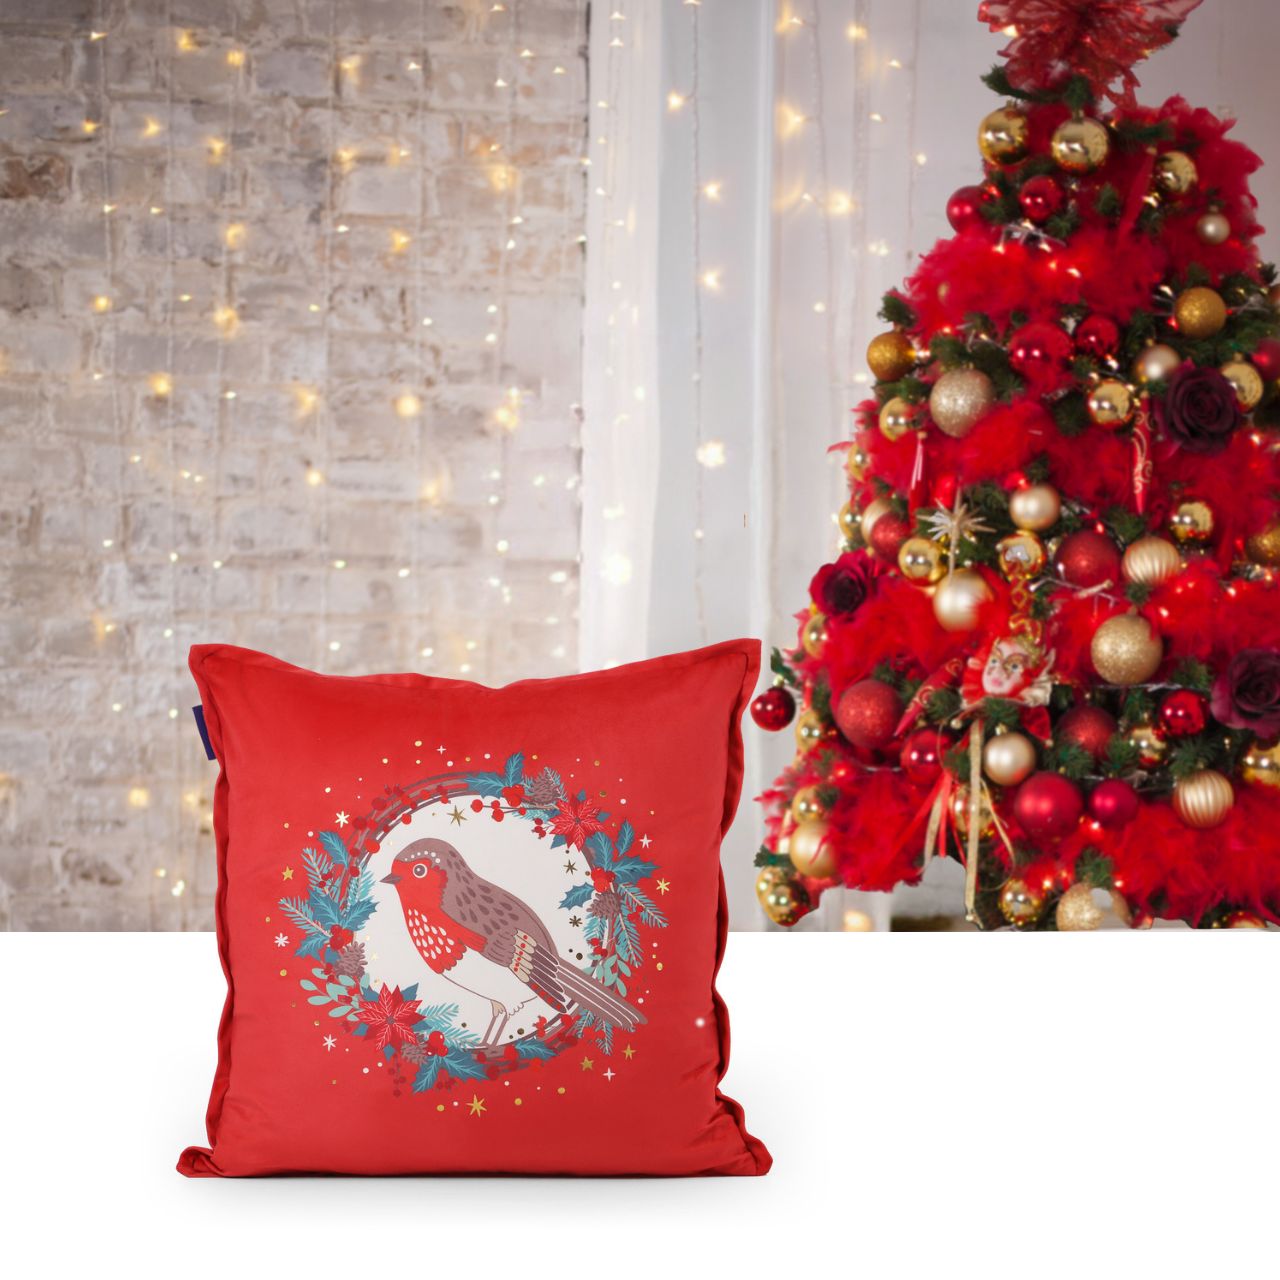 Christmas Cushion - Robin by Tipperary Crystal  Gather your loved ones for a holiday celebration to remember. We just Love Christmas! The festive season, the giving of gifts, creating memories and being together with family and loved ones. Have lots of fun with our lovingly designed and created Christmas decorations, each one has a magic sparkle of elf dust!